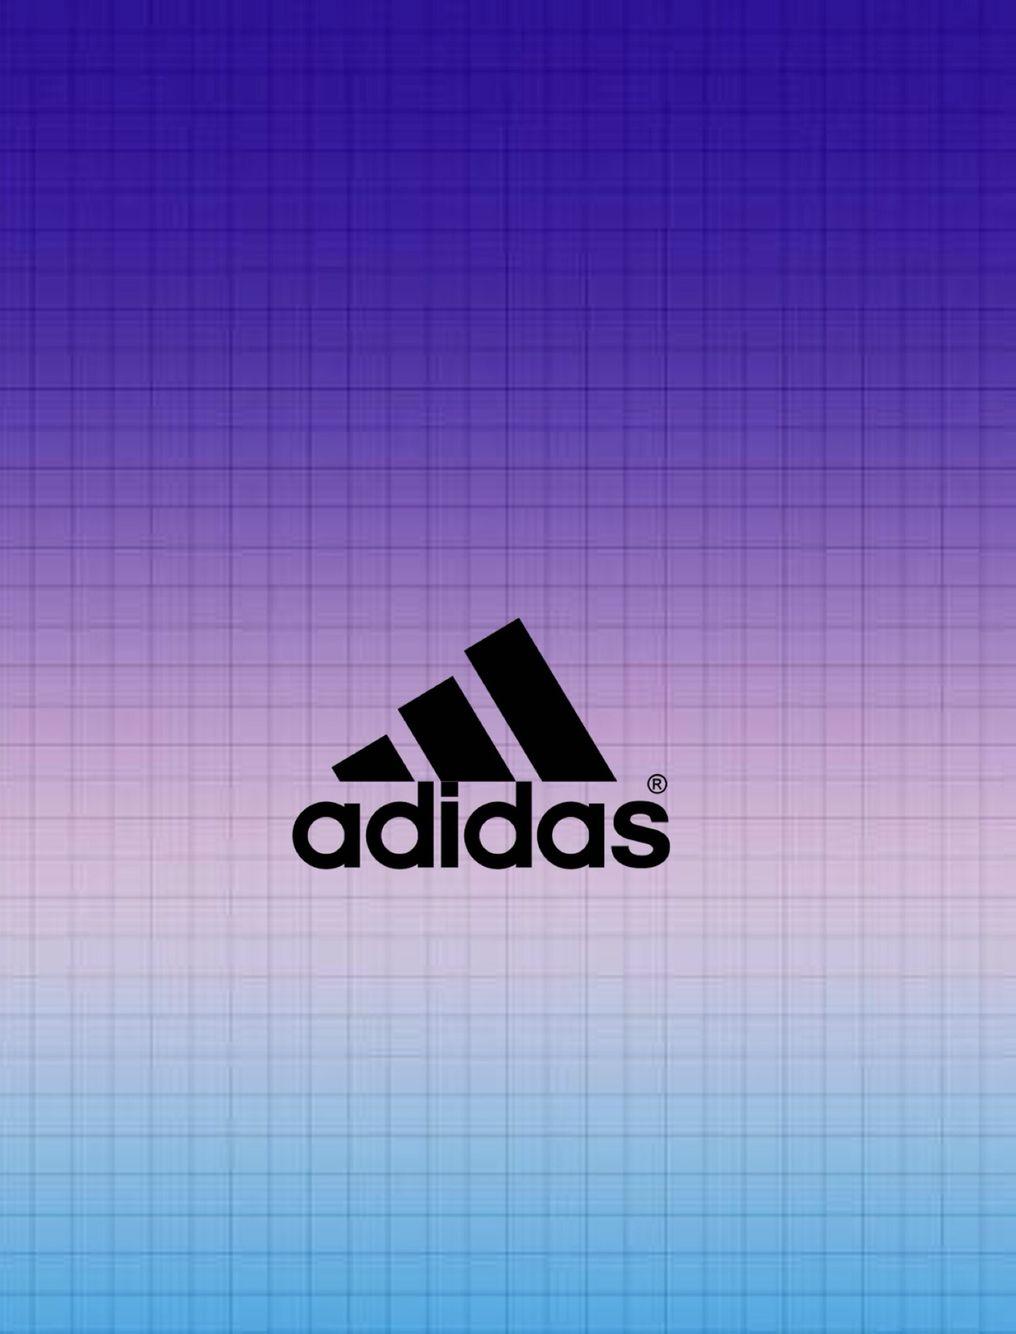 Adidas aesthetic wallpaper. benfica. Adidas, Shoes heels boots, Nike